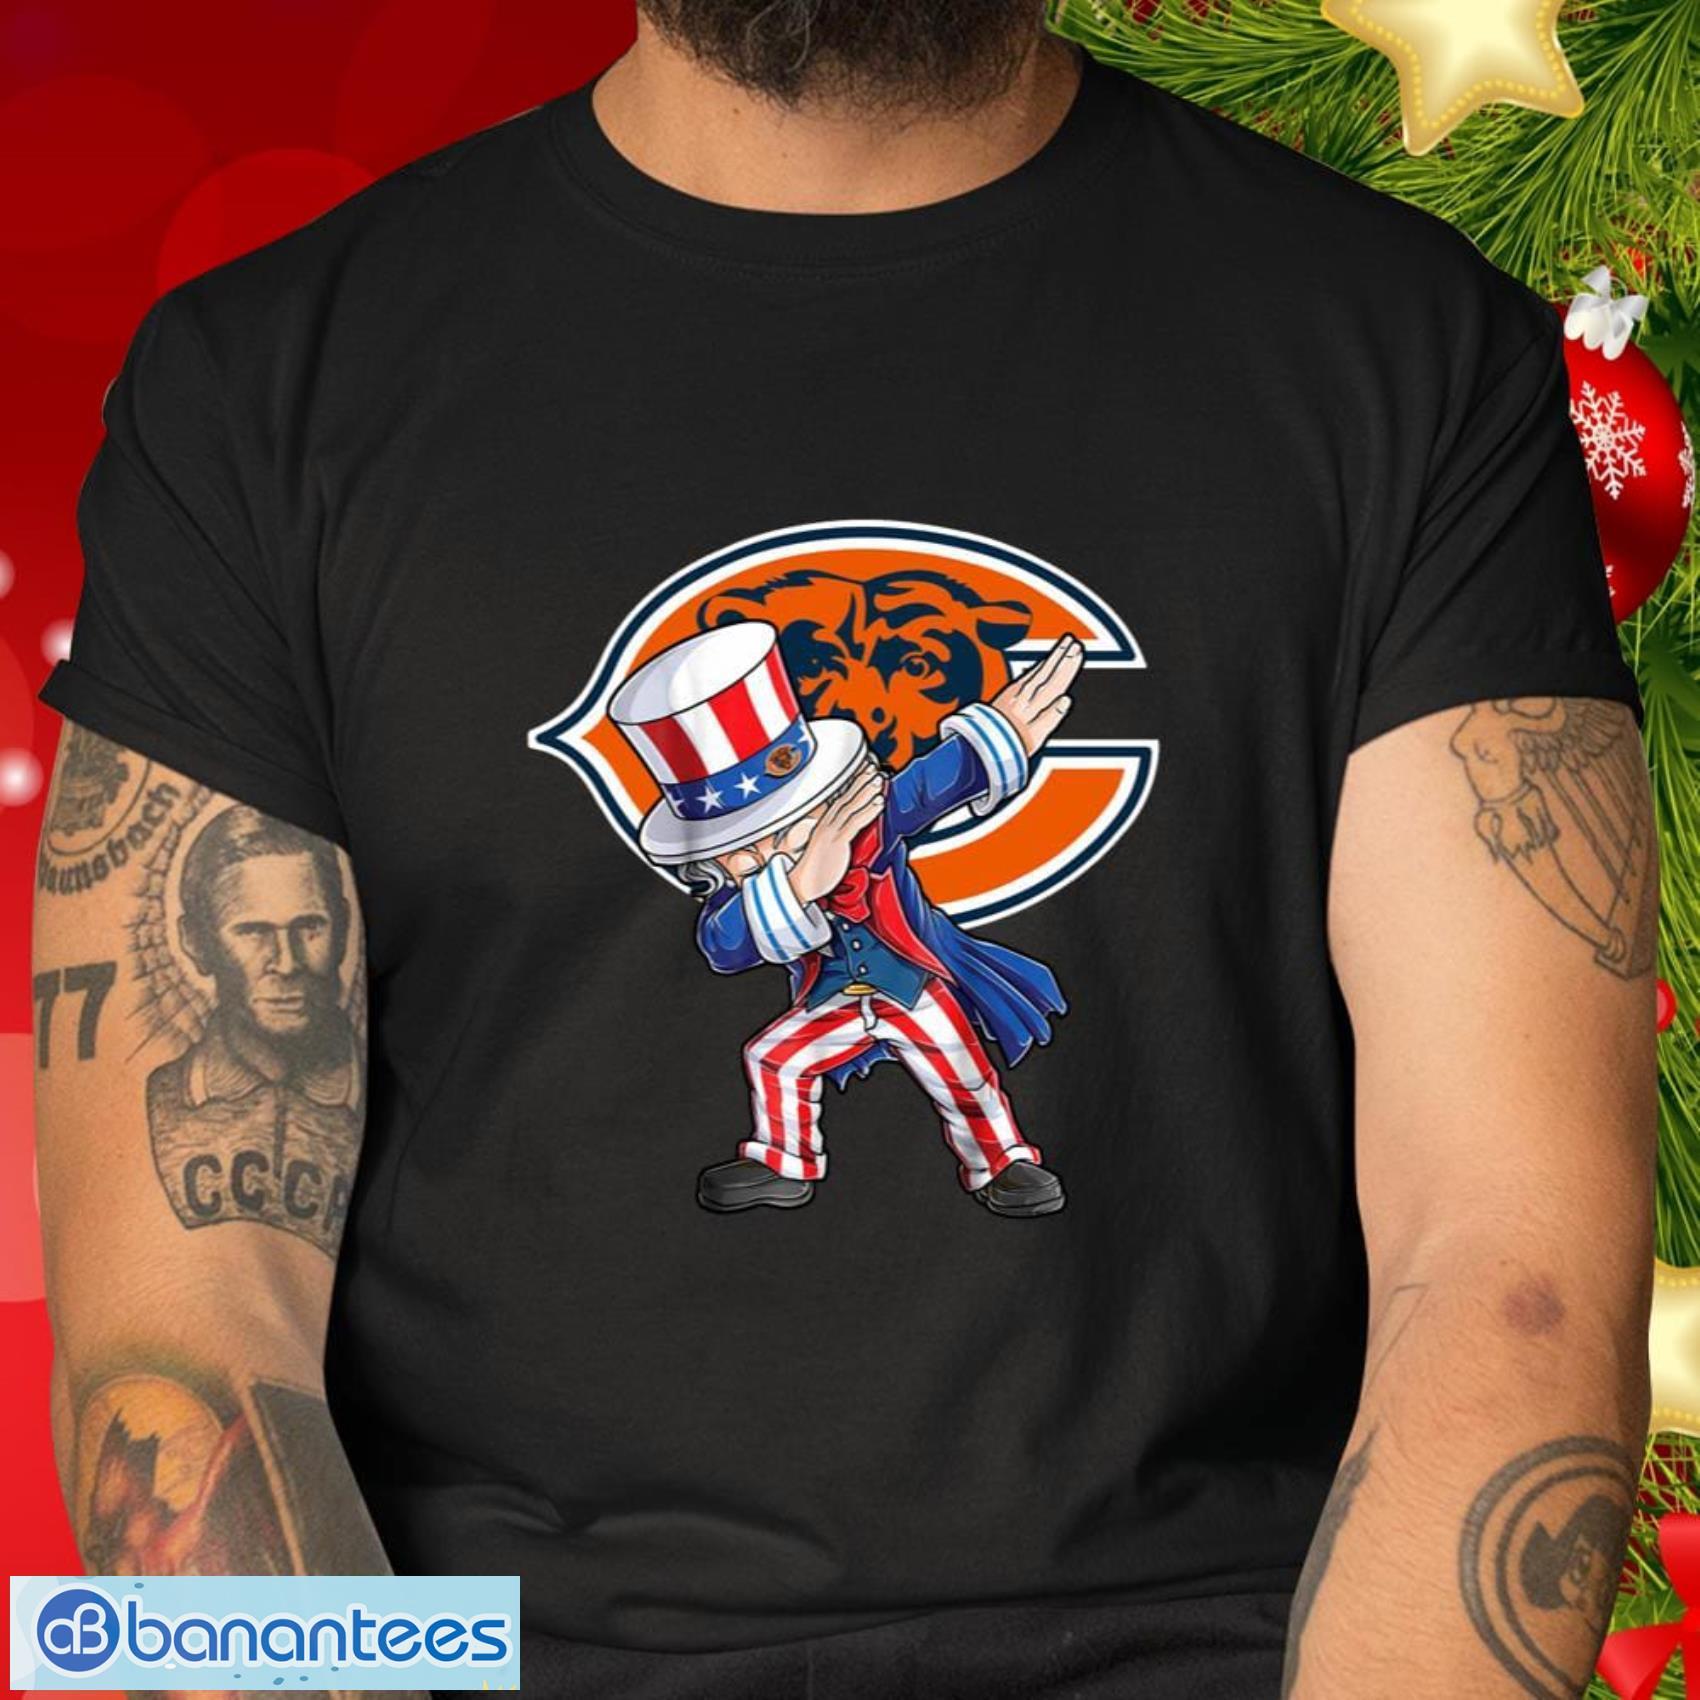 Chicago Bears NFL Football Gift Fr Fans Dabbing Uncle Sam The Fourth of July T Shirt - Chicago Bears NFL Football Dabbing Uncle Sam The Fourth of July T Shirt_2